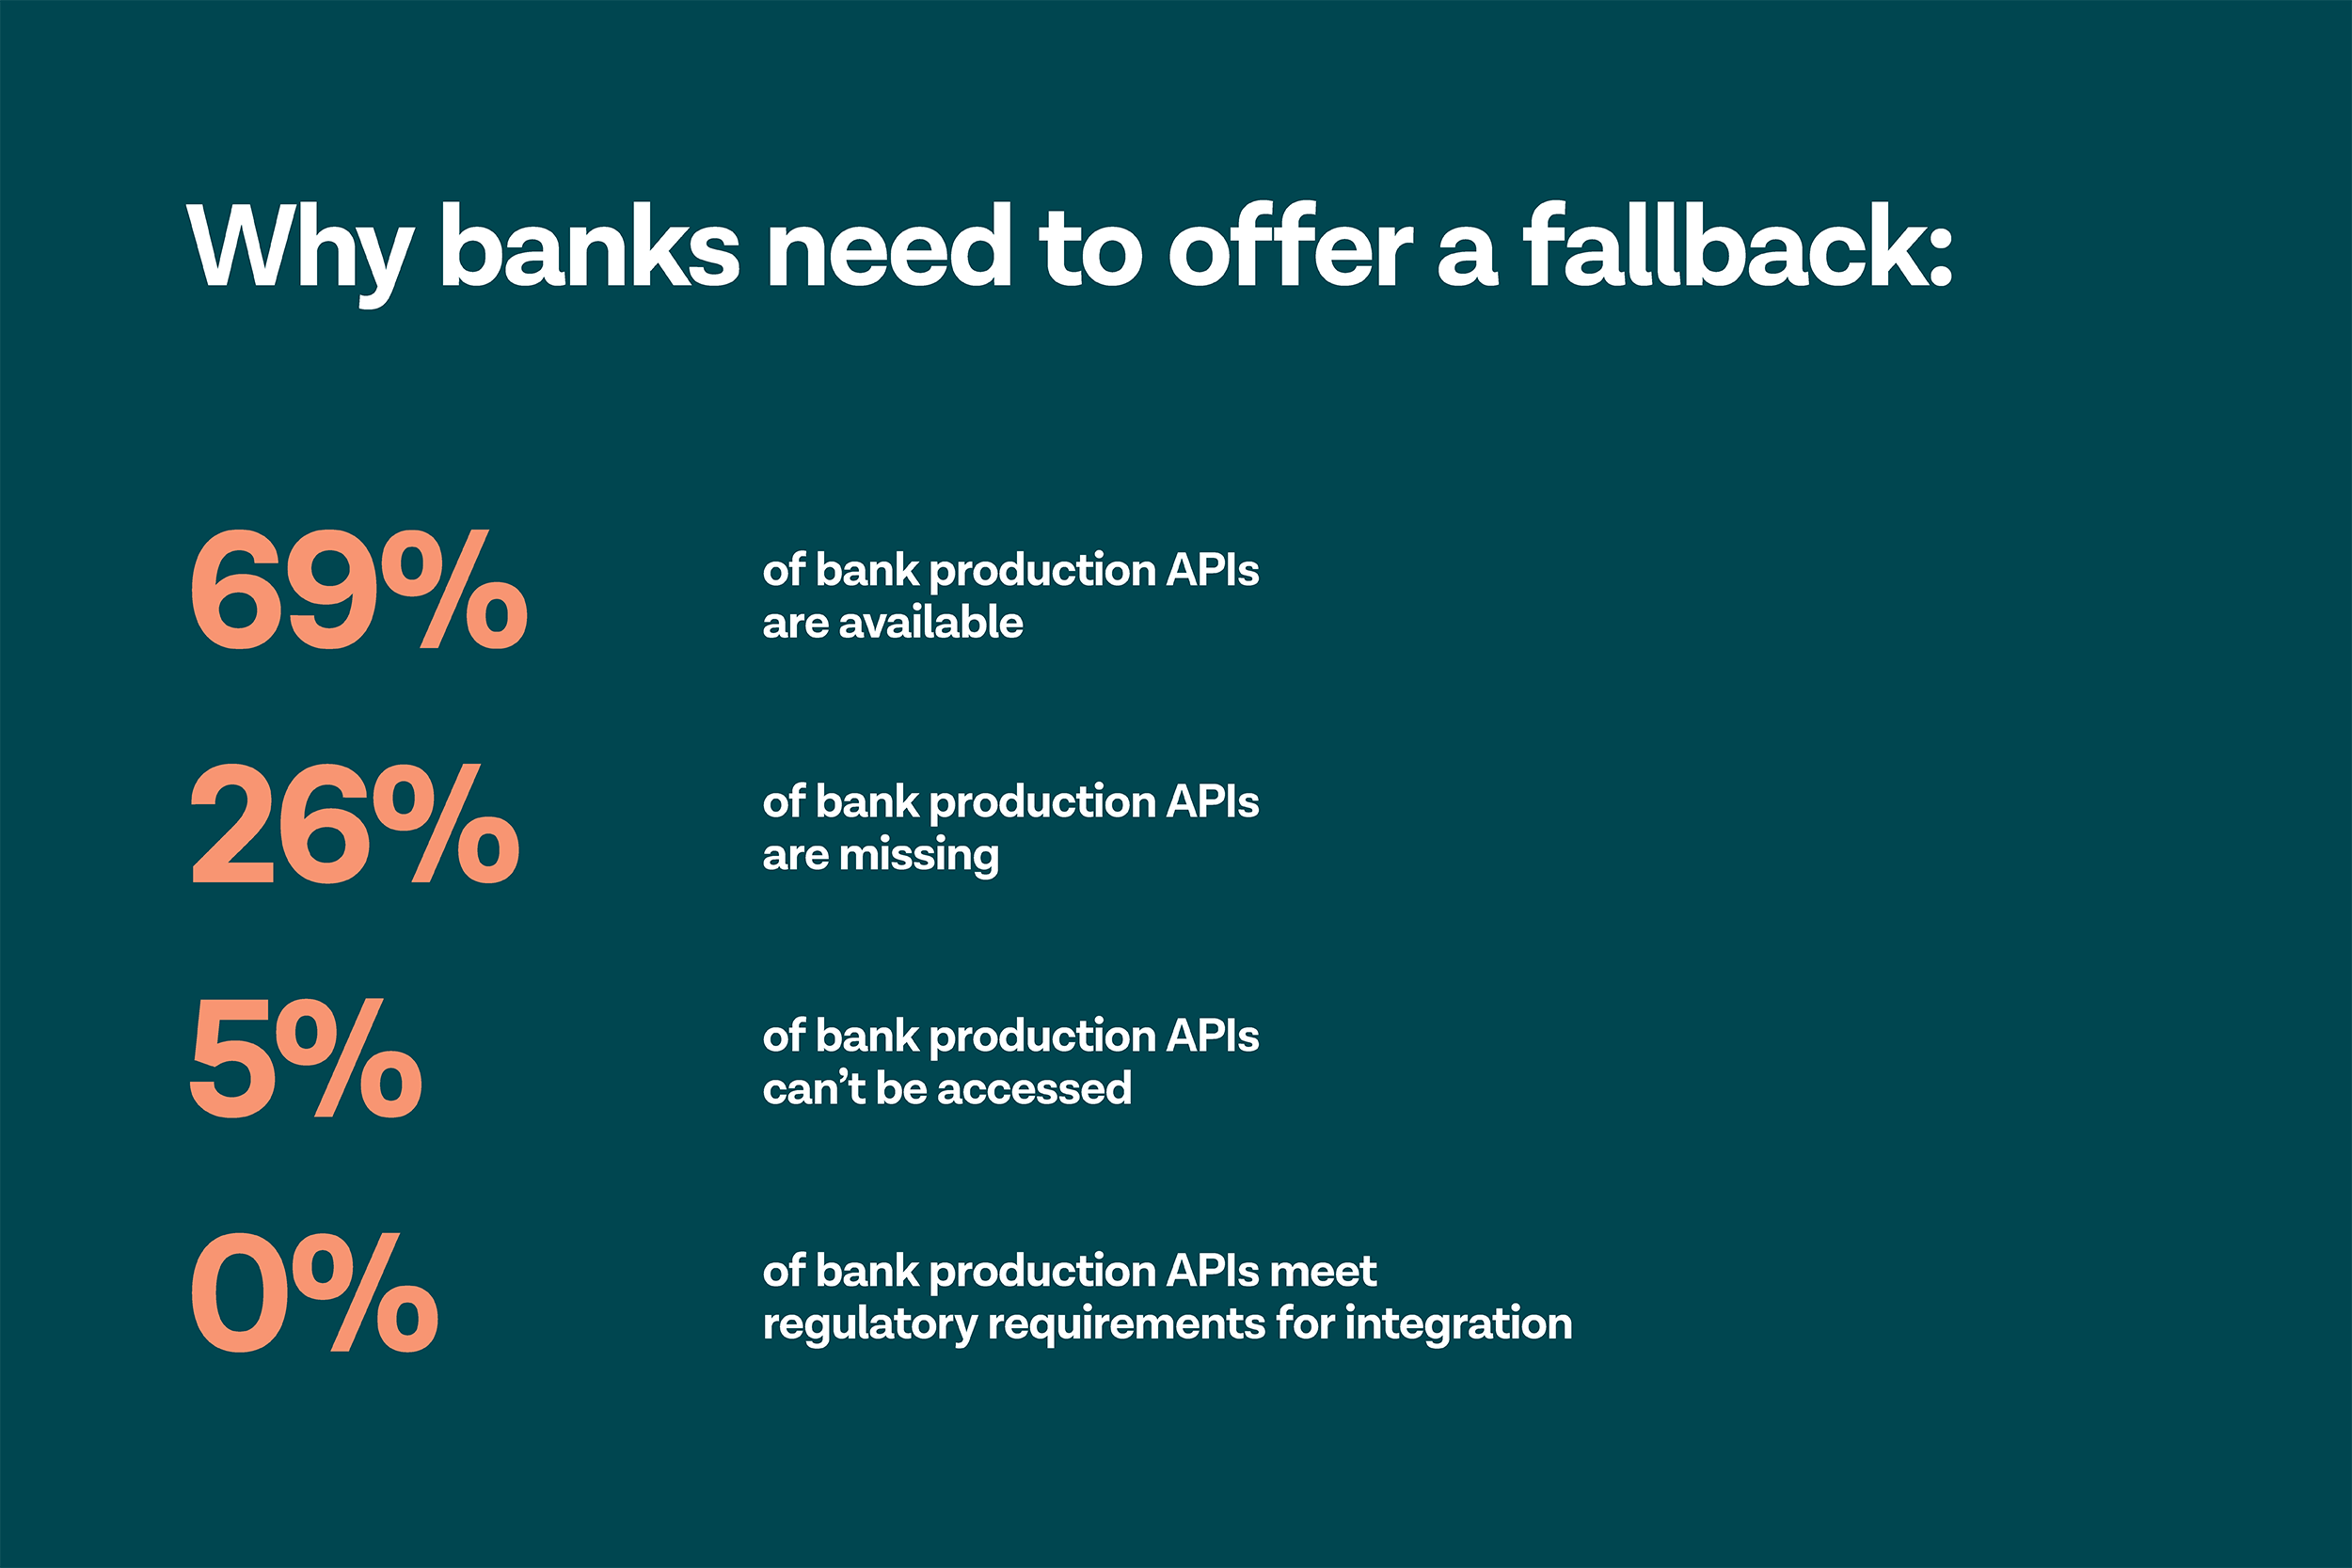 We raised the alarm bells earlier this month that the banks’ production APIs are far from ready – a reality that could threaten the services that millions of consumers enjoy. If they remain poor, then the success of PSD2 could hinge on a safety net that’s built into the regulation. But with no clarity around what this safety net should look like or how it will be applied, there is a real risk it won’t provide the security it was intended to.